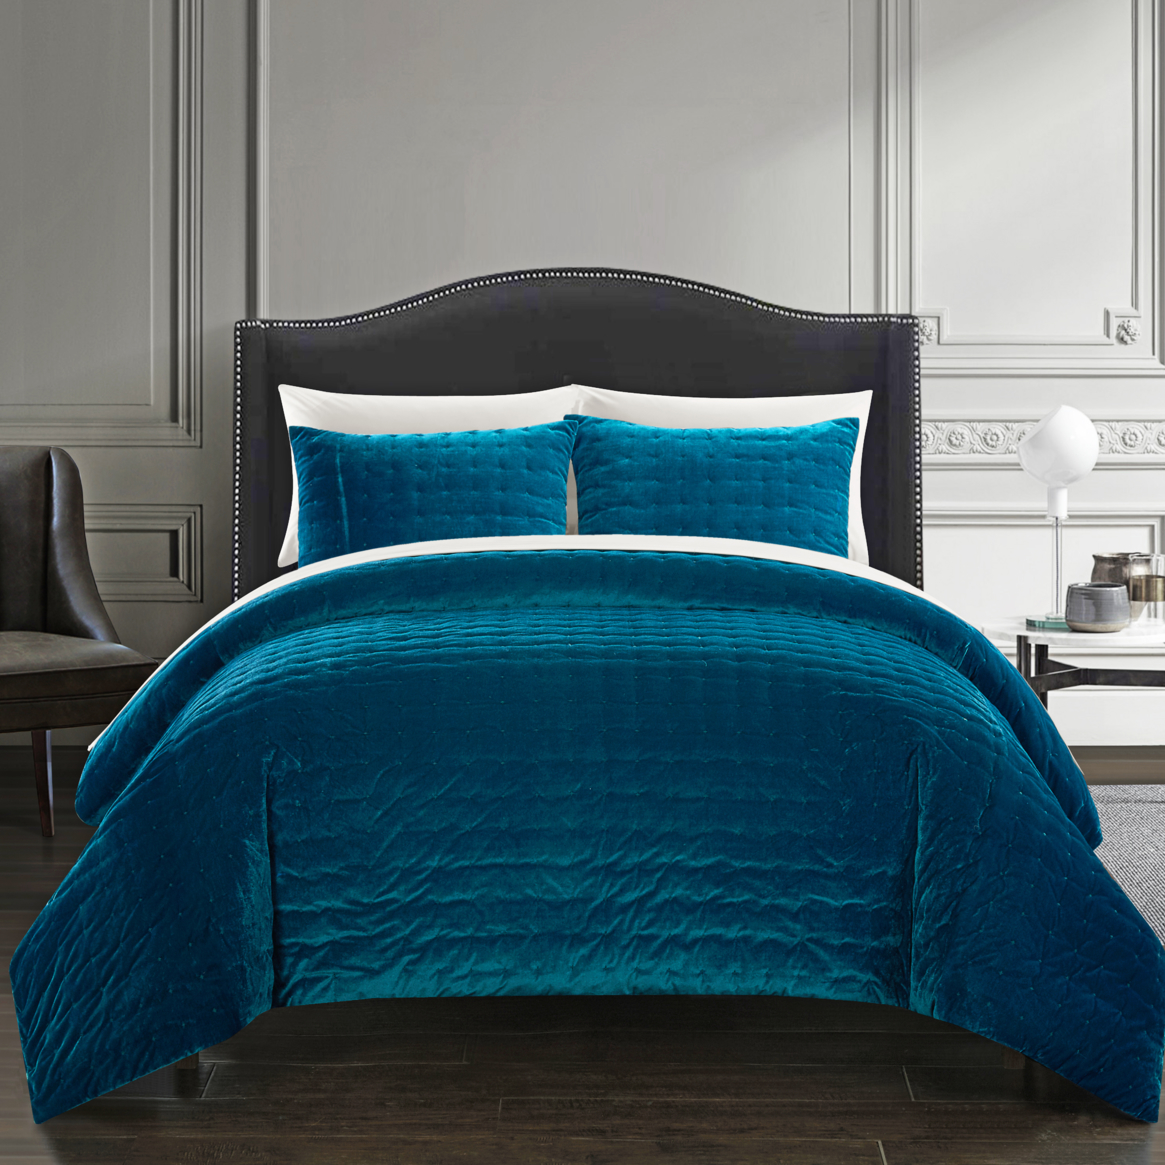 Chaya 7 Piece Comforter Set Luxurious Hand Stitched Velvet Bed In A Bag Bedding - Teal, King